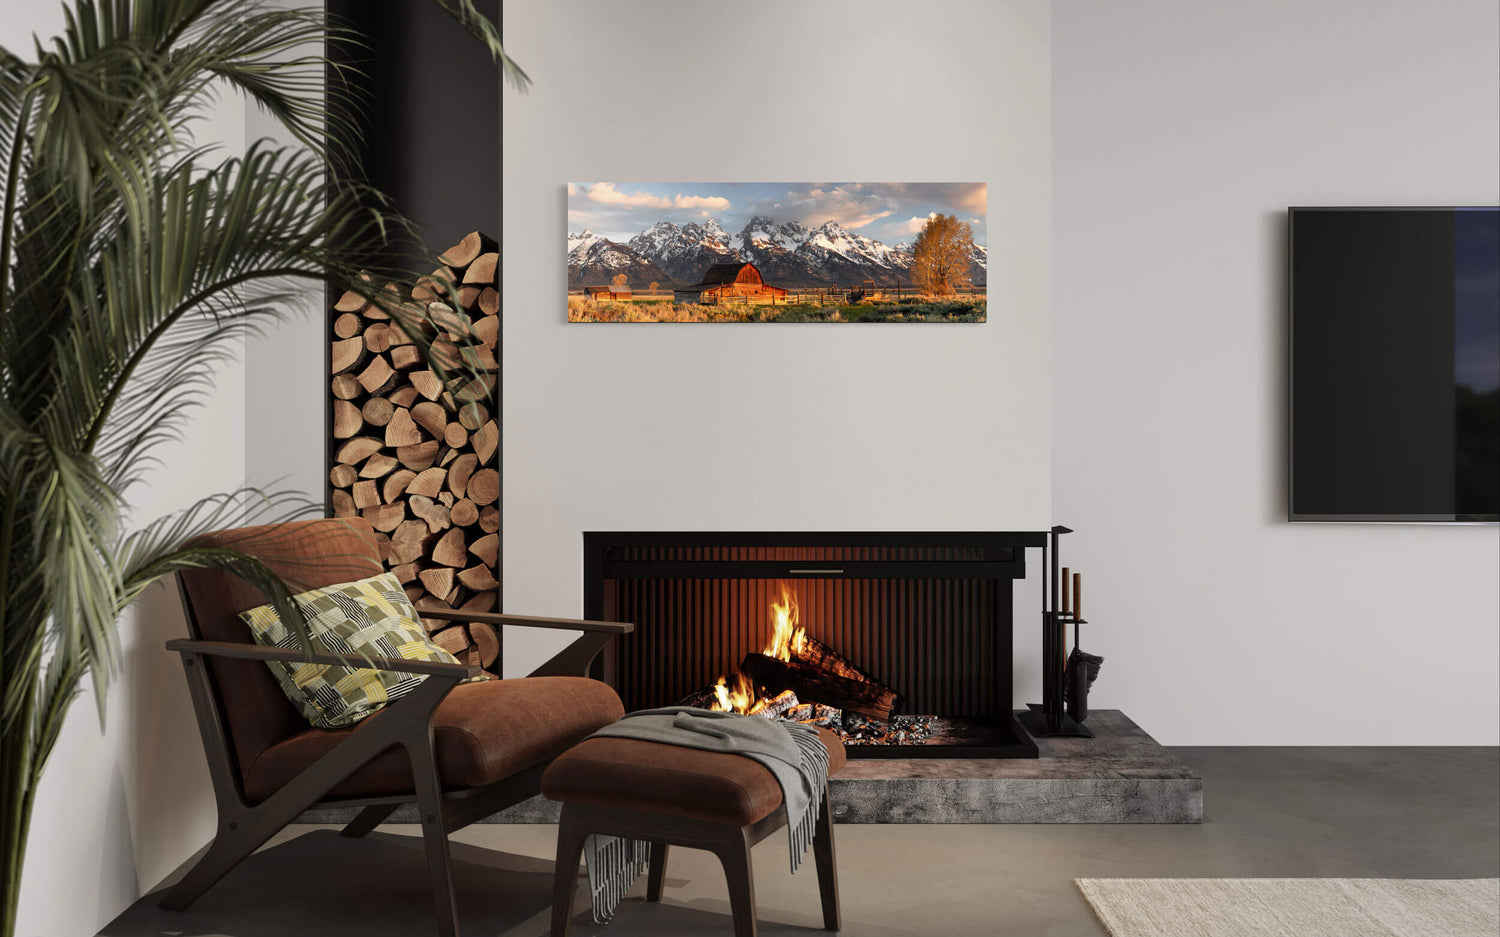 A piece of Jackson Hole art showing Grand Teton National Park hangs in a living room.